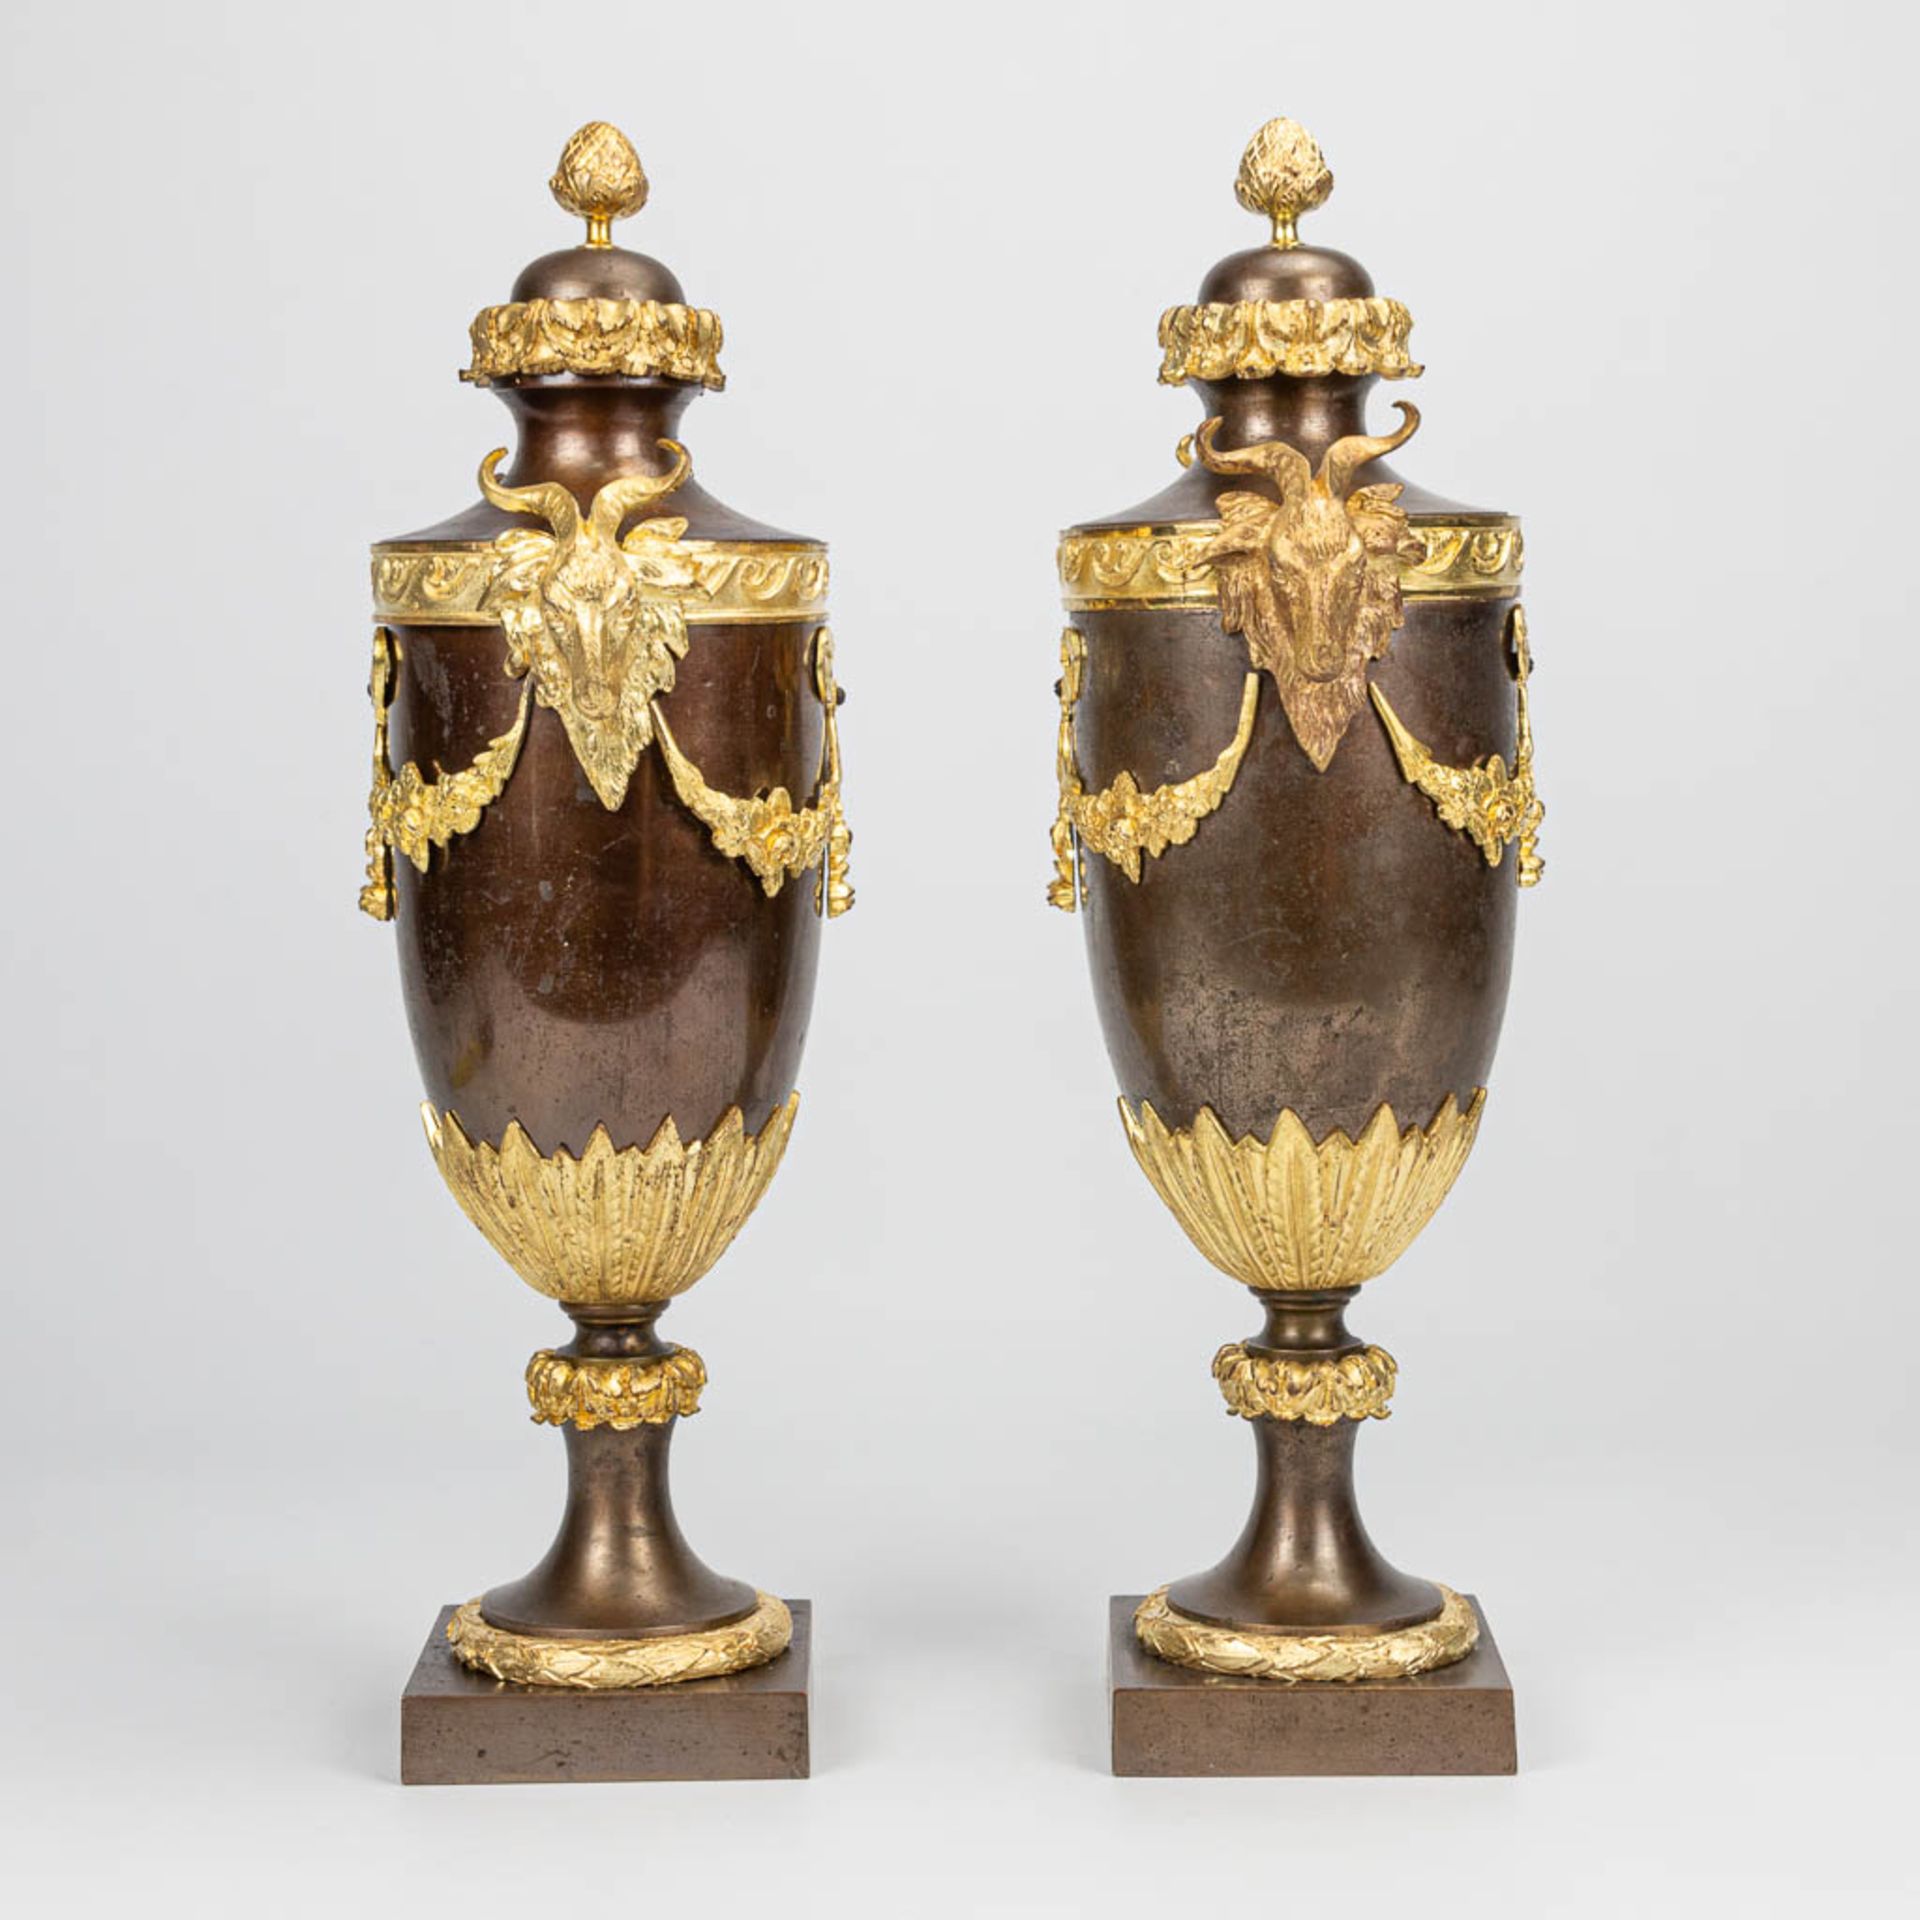 A pair of casolettes with ram's heads made of bronze and mounted with gilt bronze. Napoleon 3. (14 x - Image 3 of 8